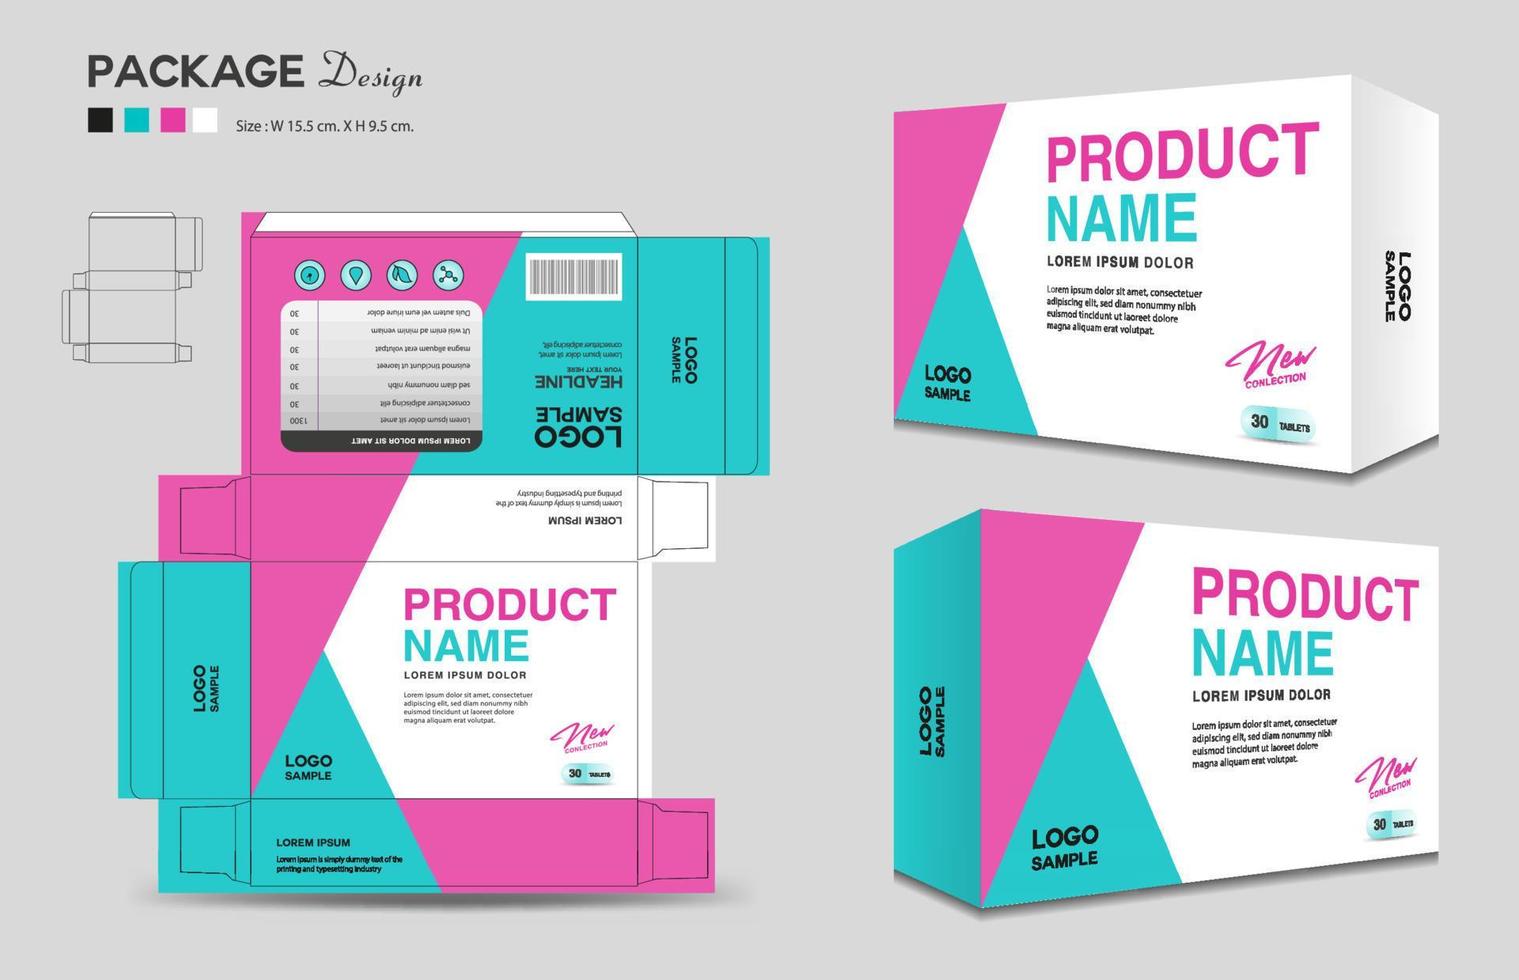 Supplements and Cosmetic box design, Package design template, box outline, Box Packaging design, Label design, healthcare label, packaging design creative idea vector, realistic mock-up vector